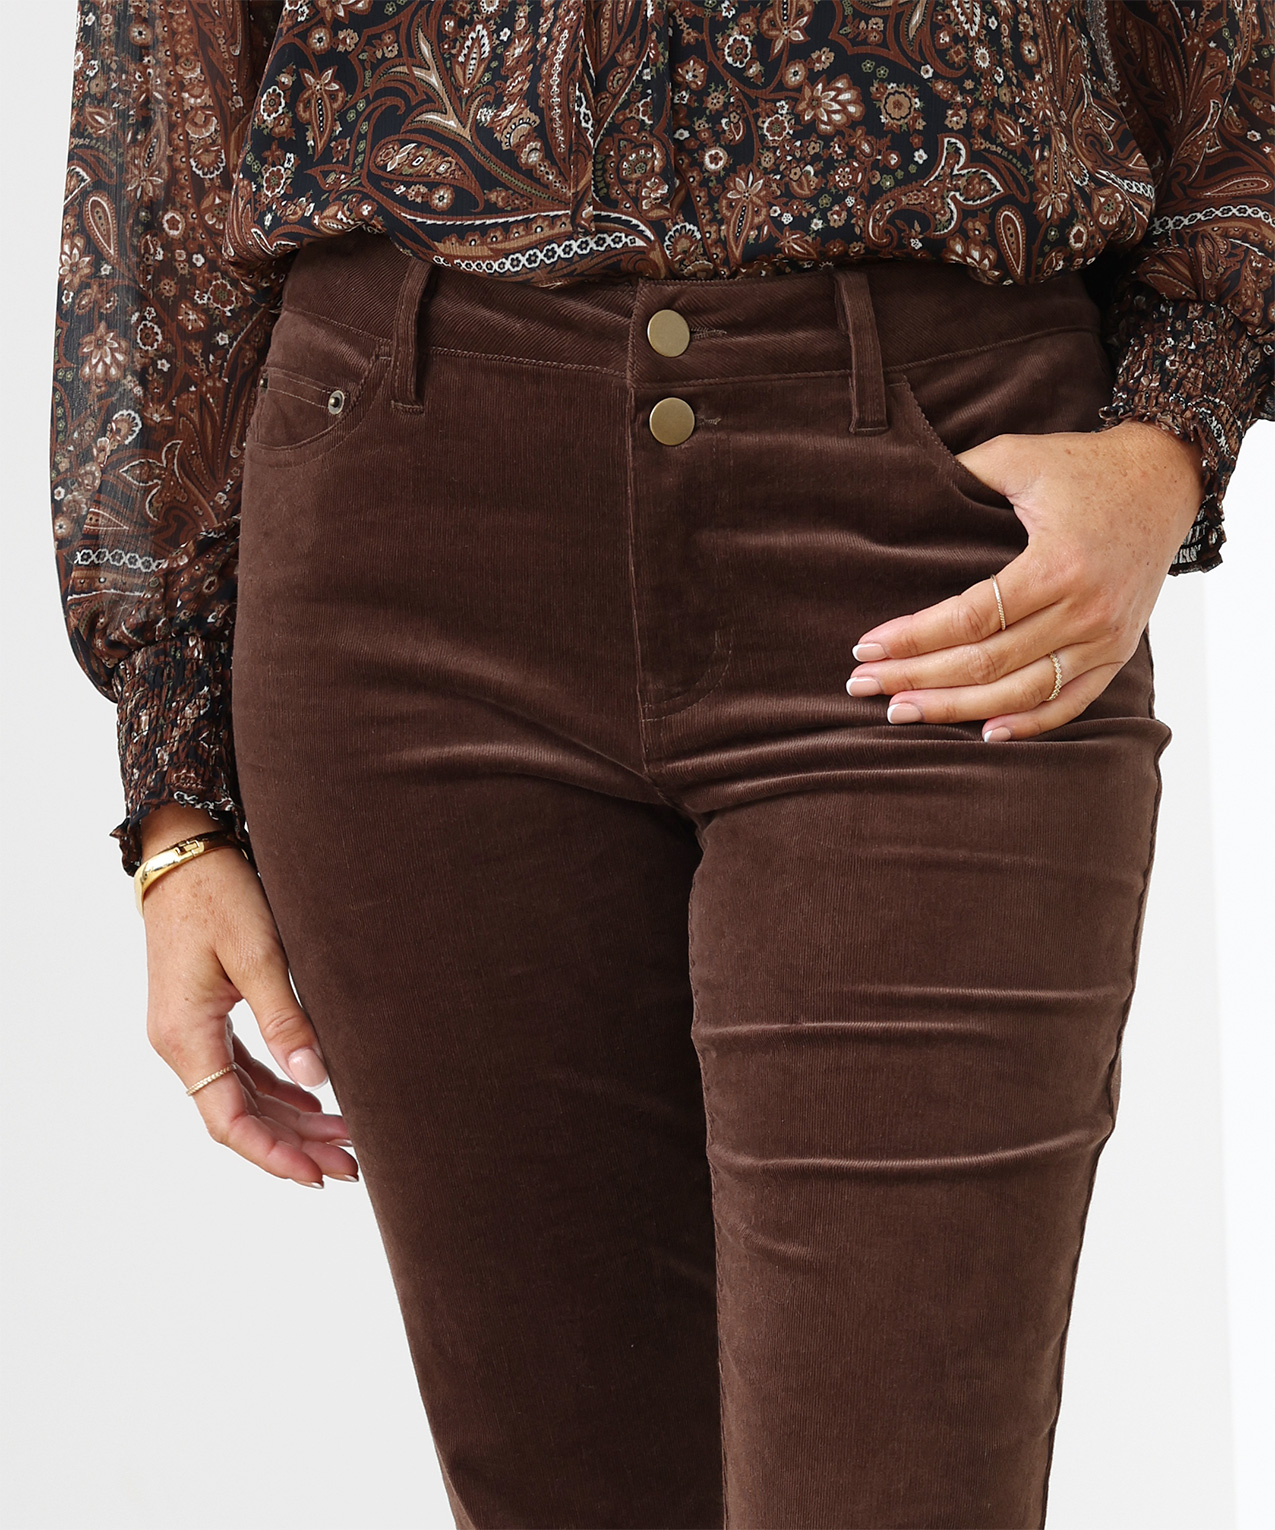 Dex Plus High-Rise Corduroy Flared Trousers